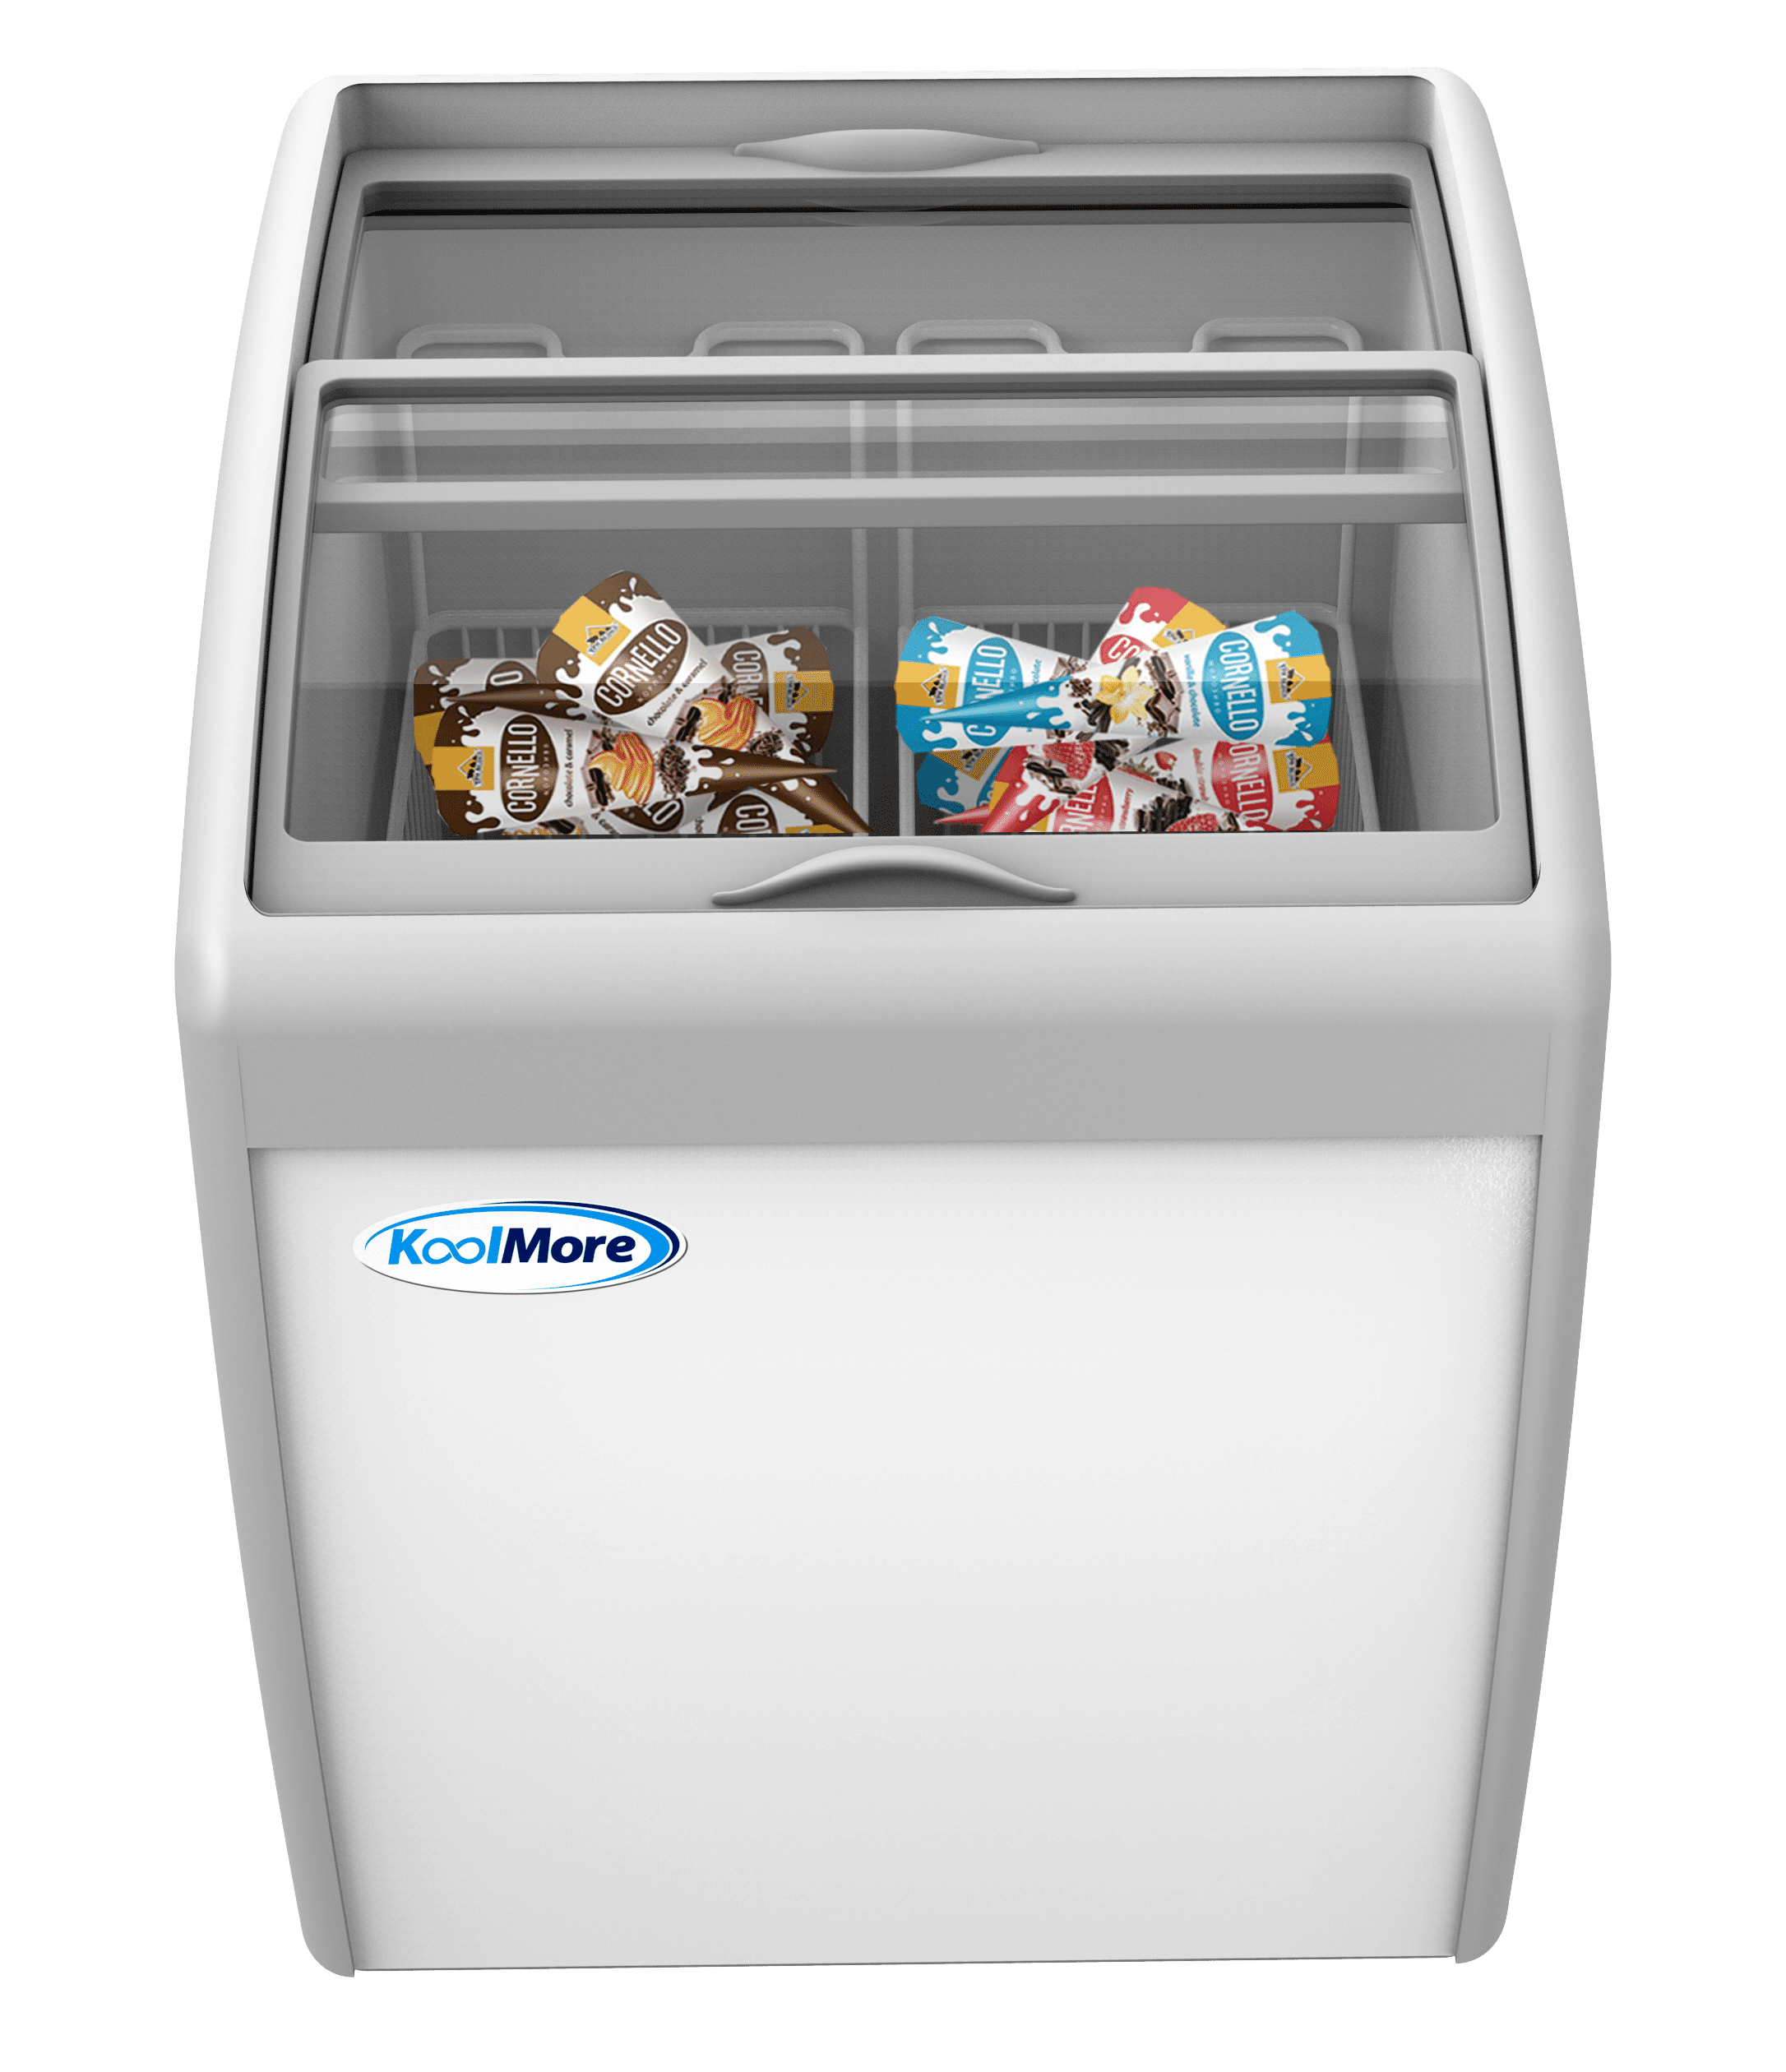  OMCAN REFRIGERATION 29 Ice cream Freezer With Flat Glass Top :  Industrial & Scientific